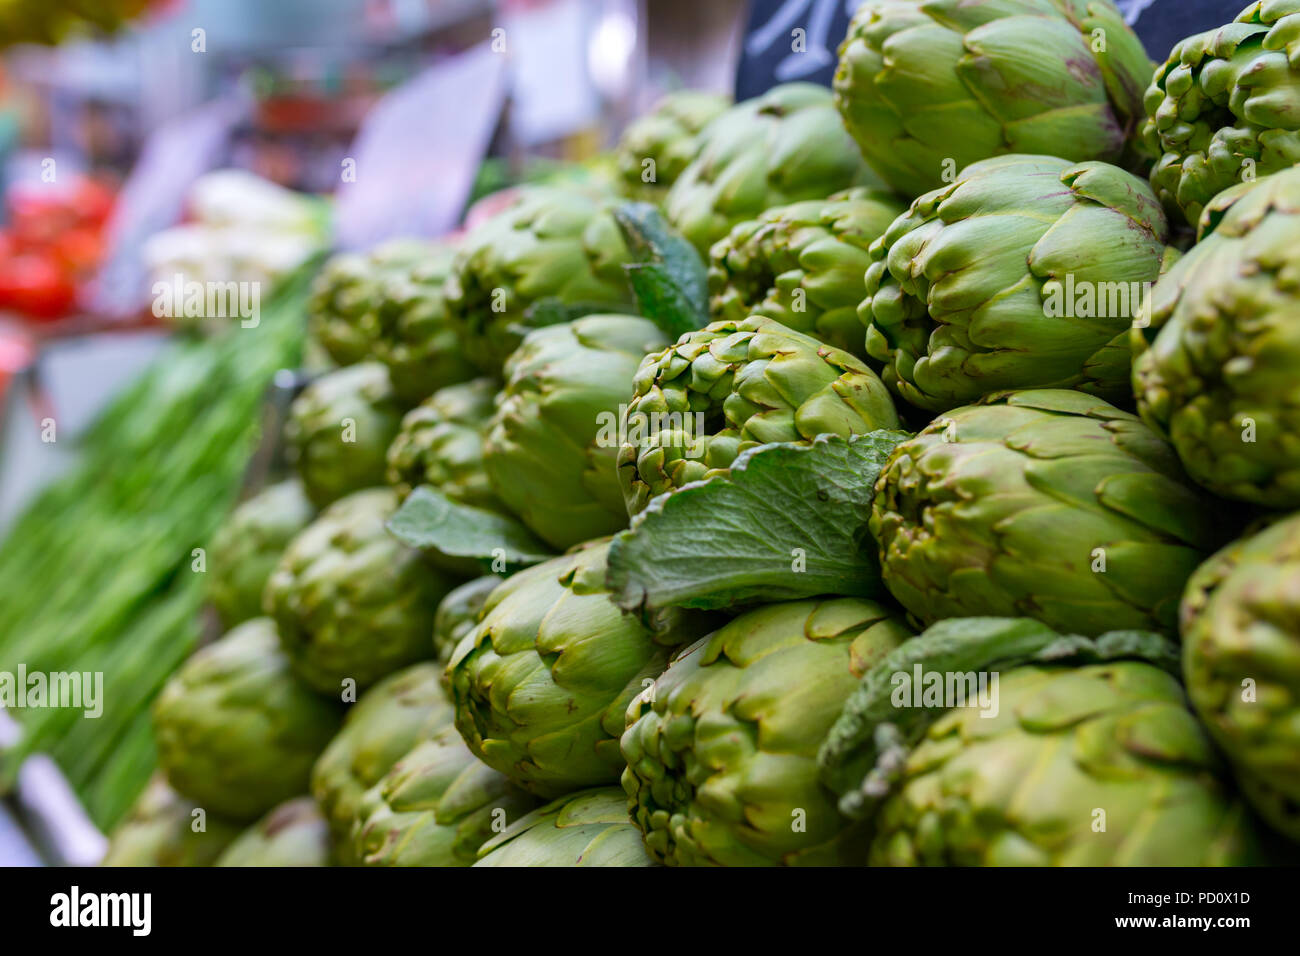 Close up view of green artichokes at local market in Barcelona Stock Photo